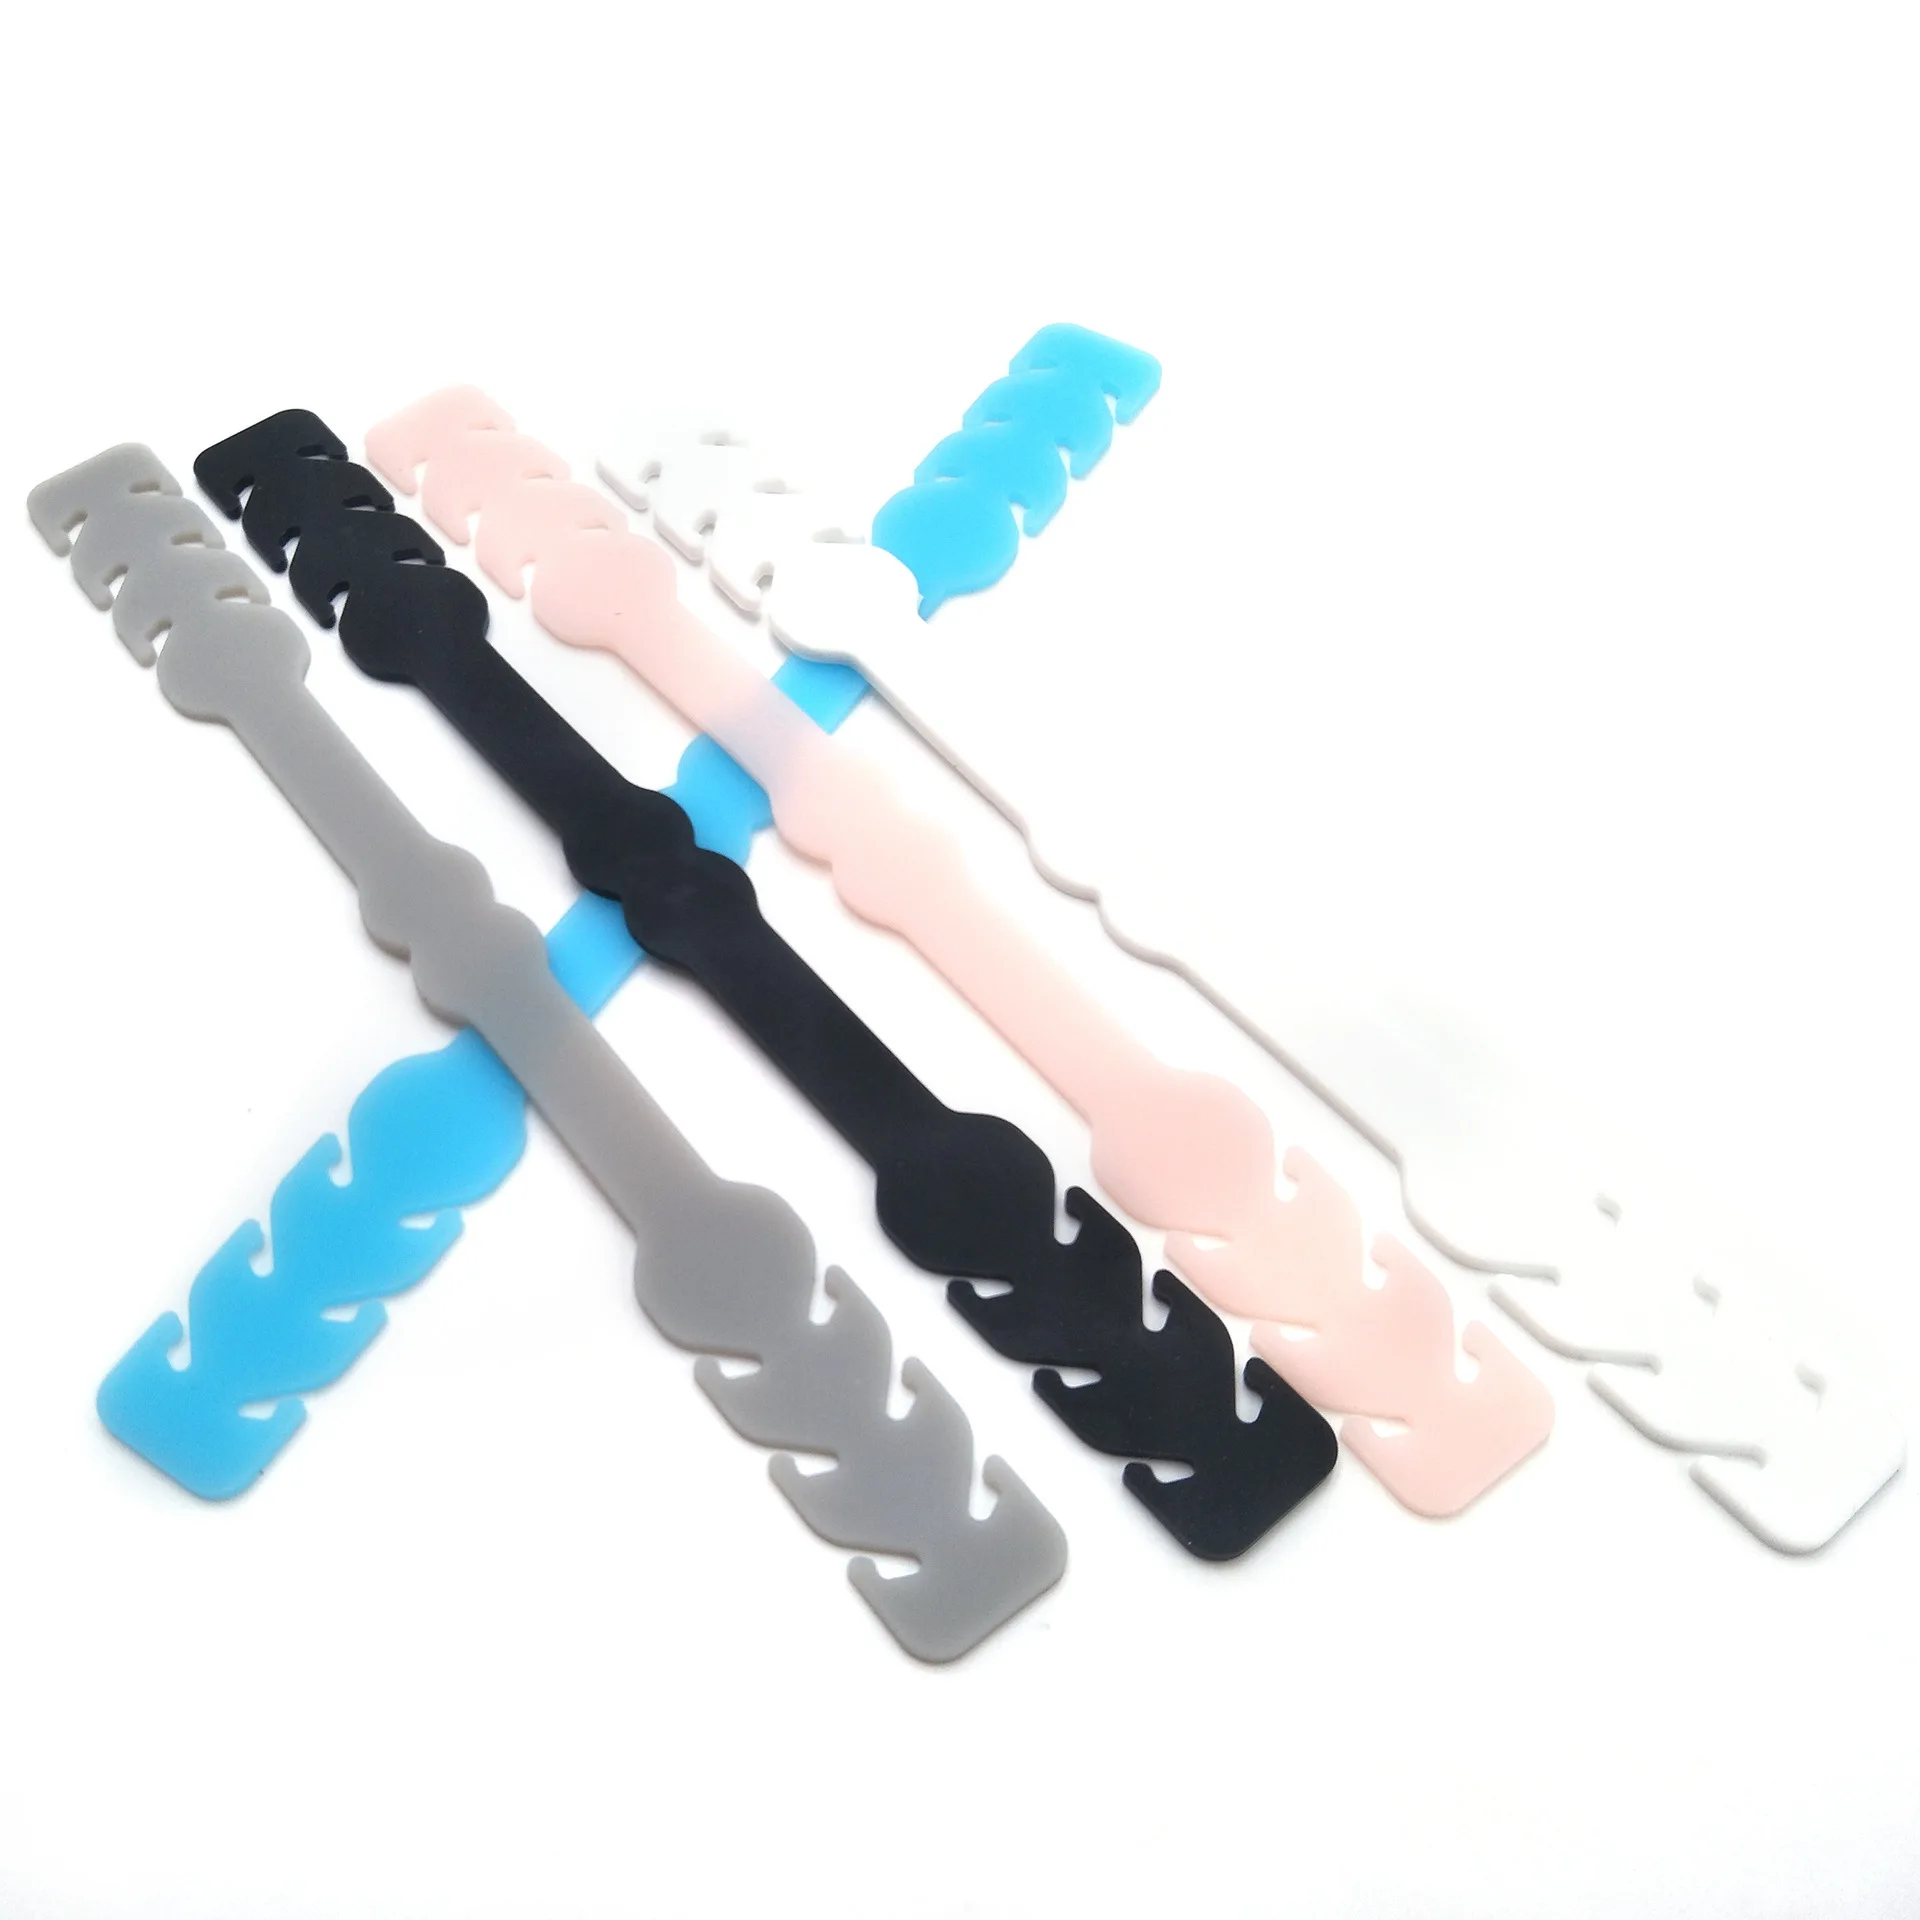 

Hot sale strap Extenders for Particulate face masking Adjustable Silicone ear hook, ear protection, Pink,black,white,blue,grey